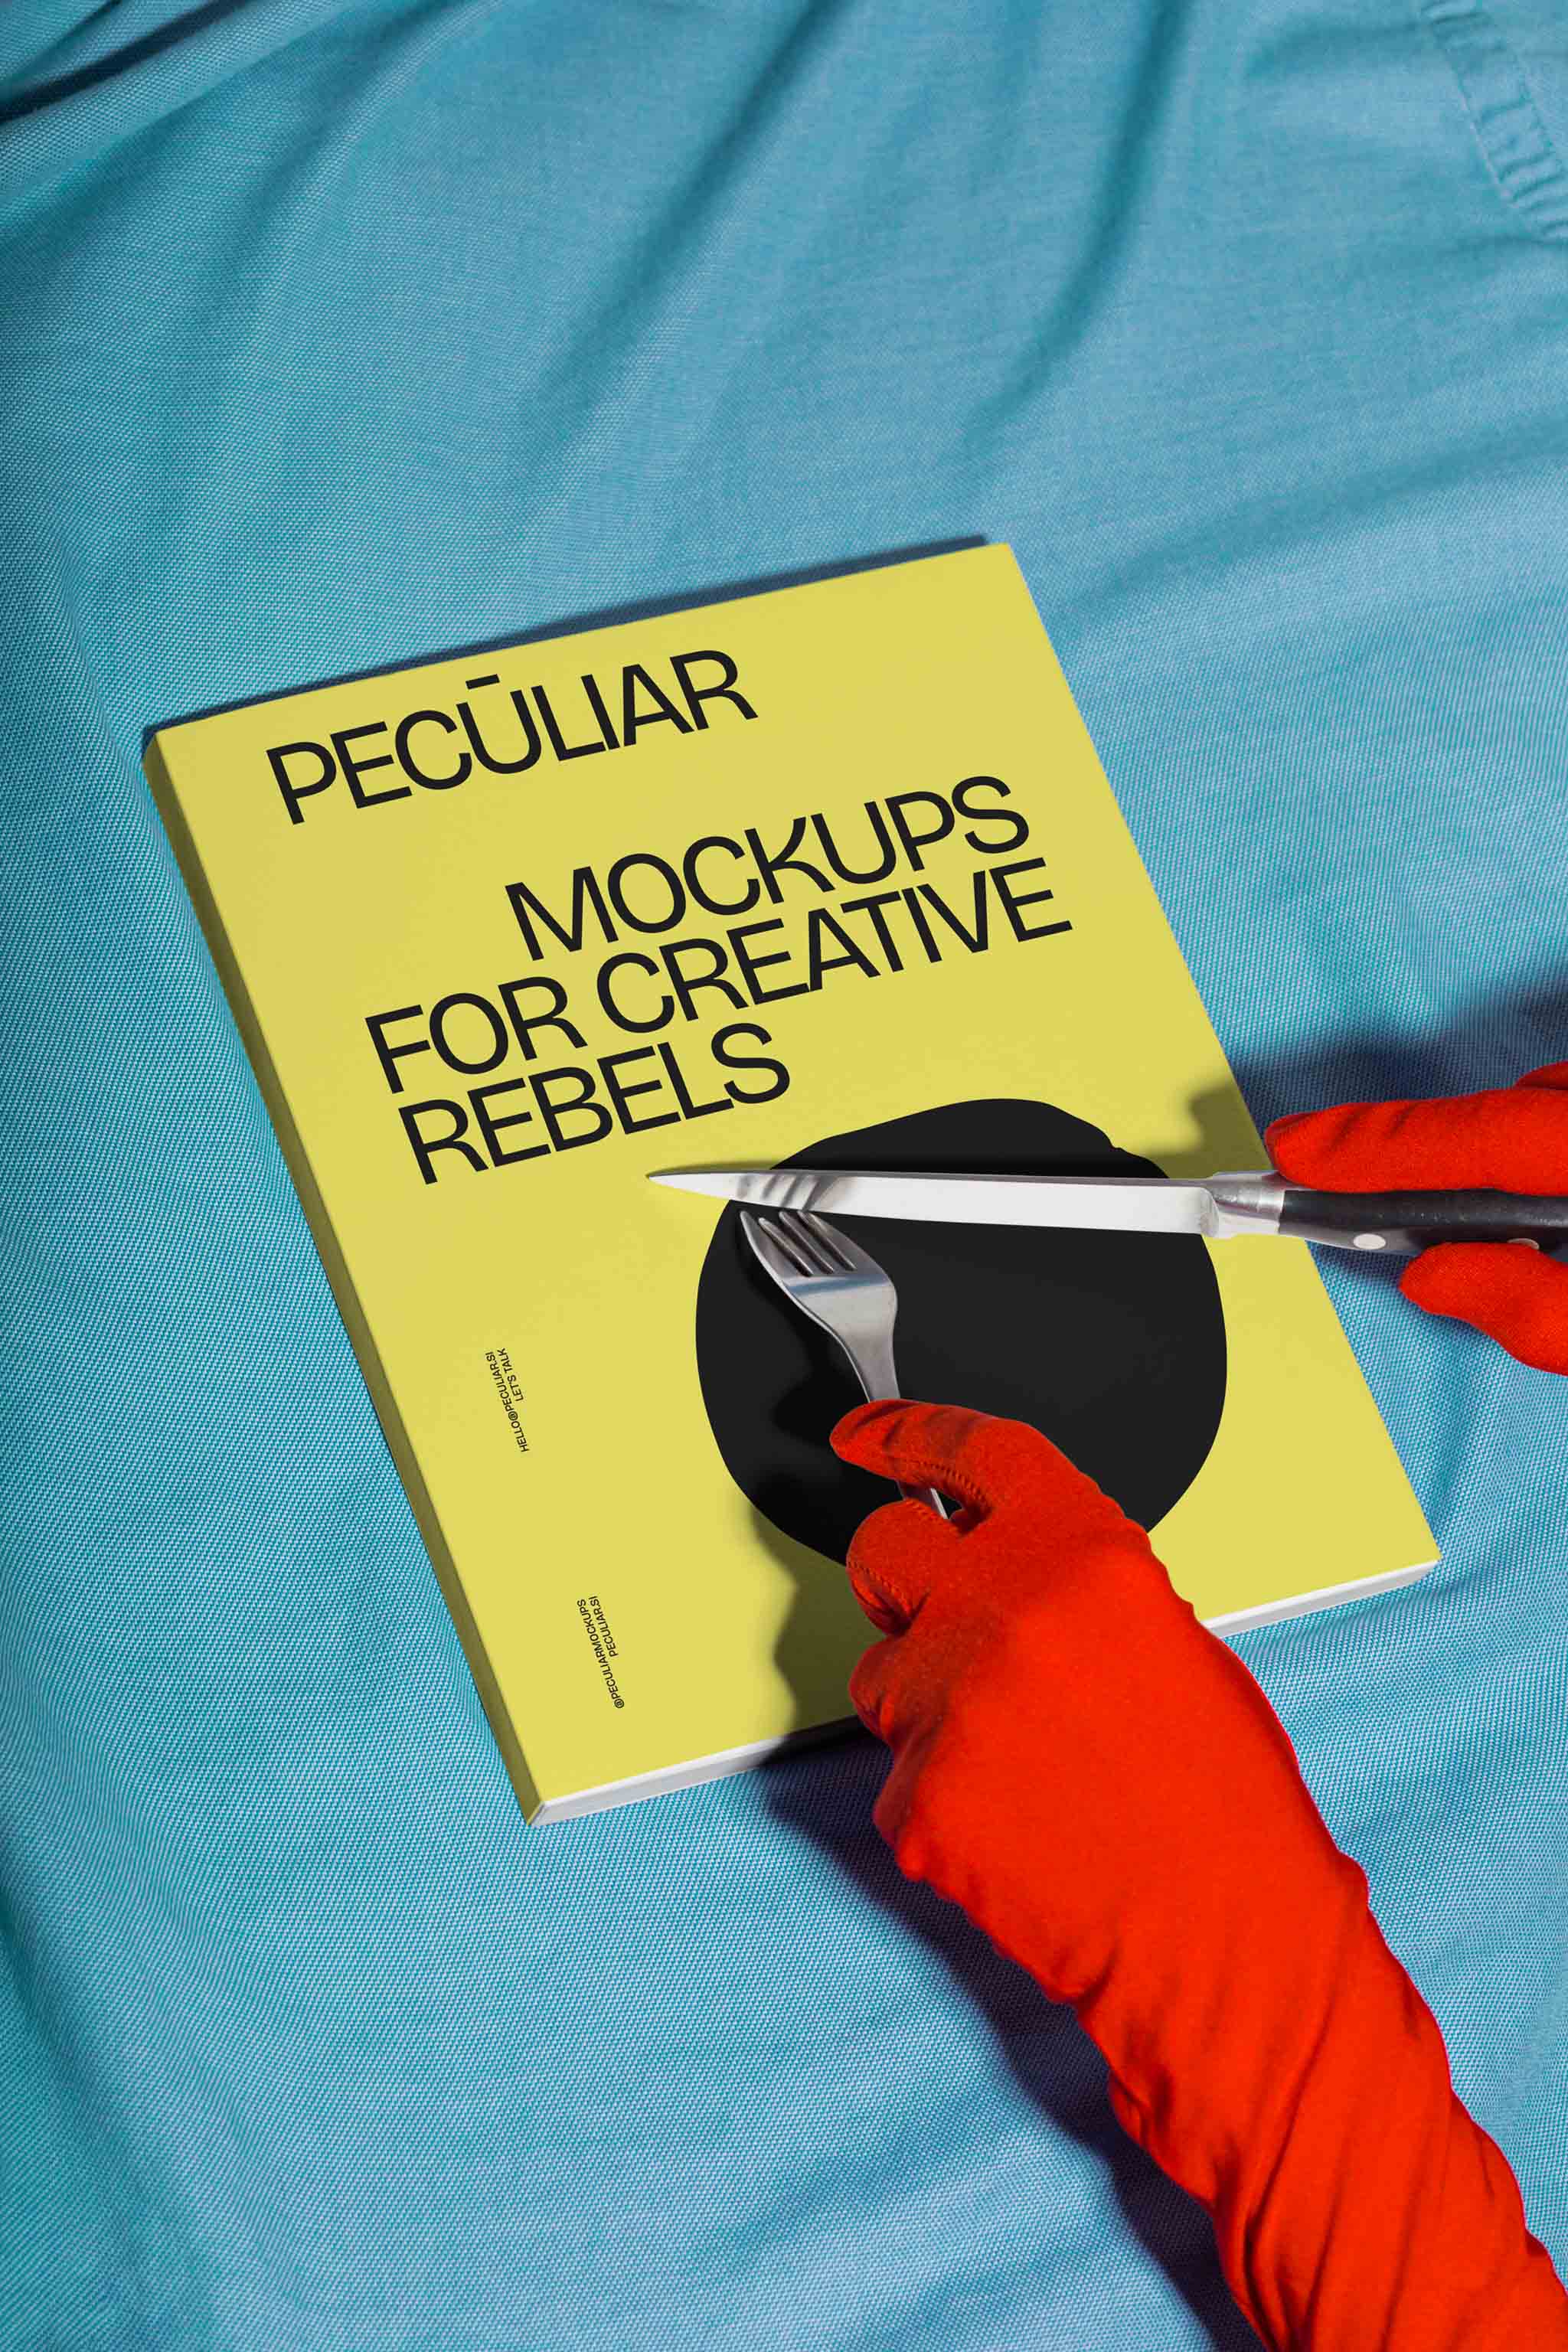 Two gloved hands holding utensils over a book cover mockup set against blue fabric, in use example alternative colors.